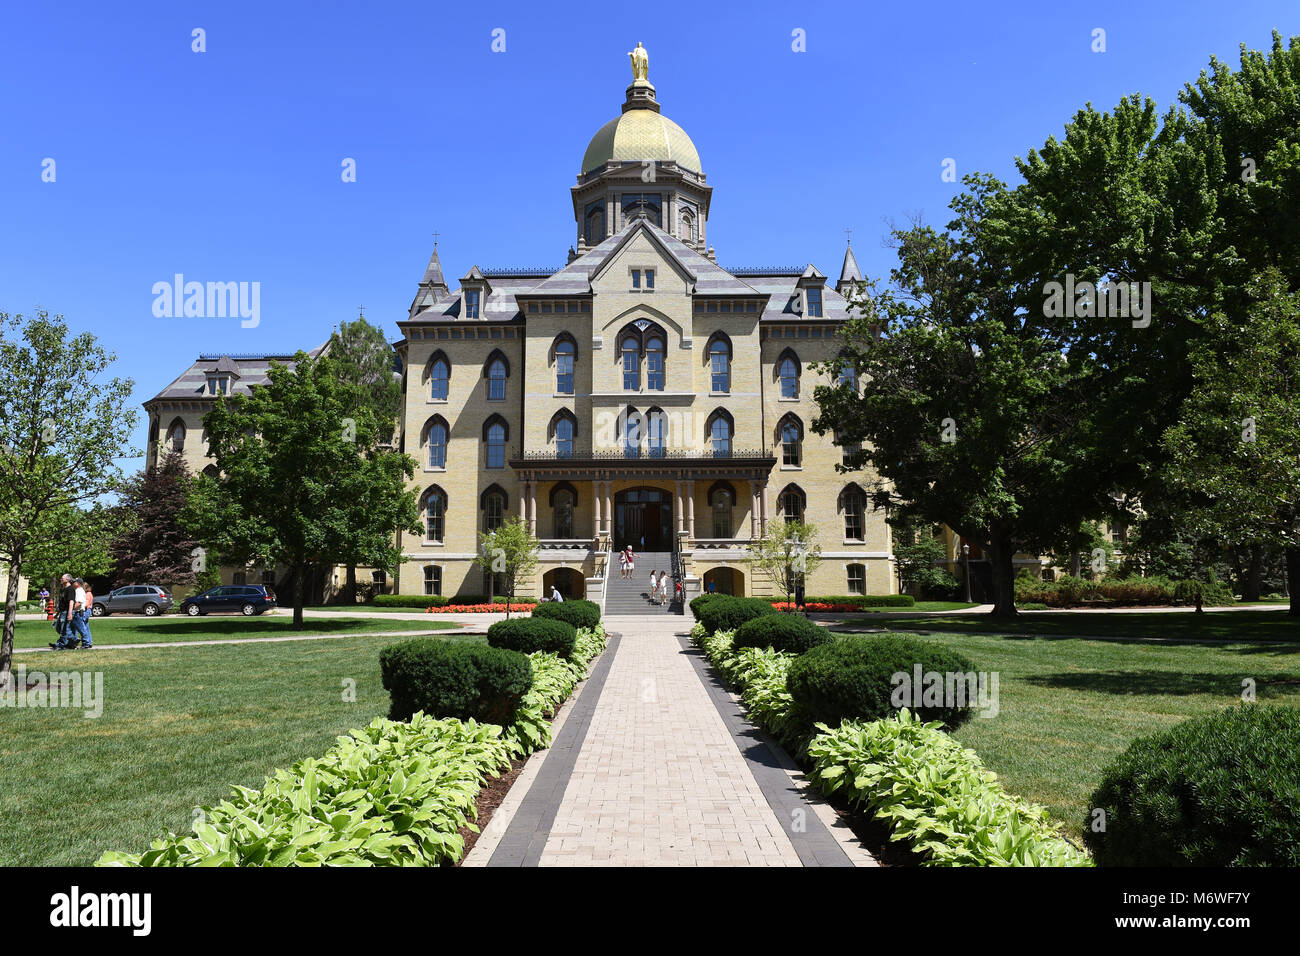 South Bend, IN, USA – 24. Juni 2016: Campus der University of Notre Dame in South Bend, Indiana. Stockfoto